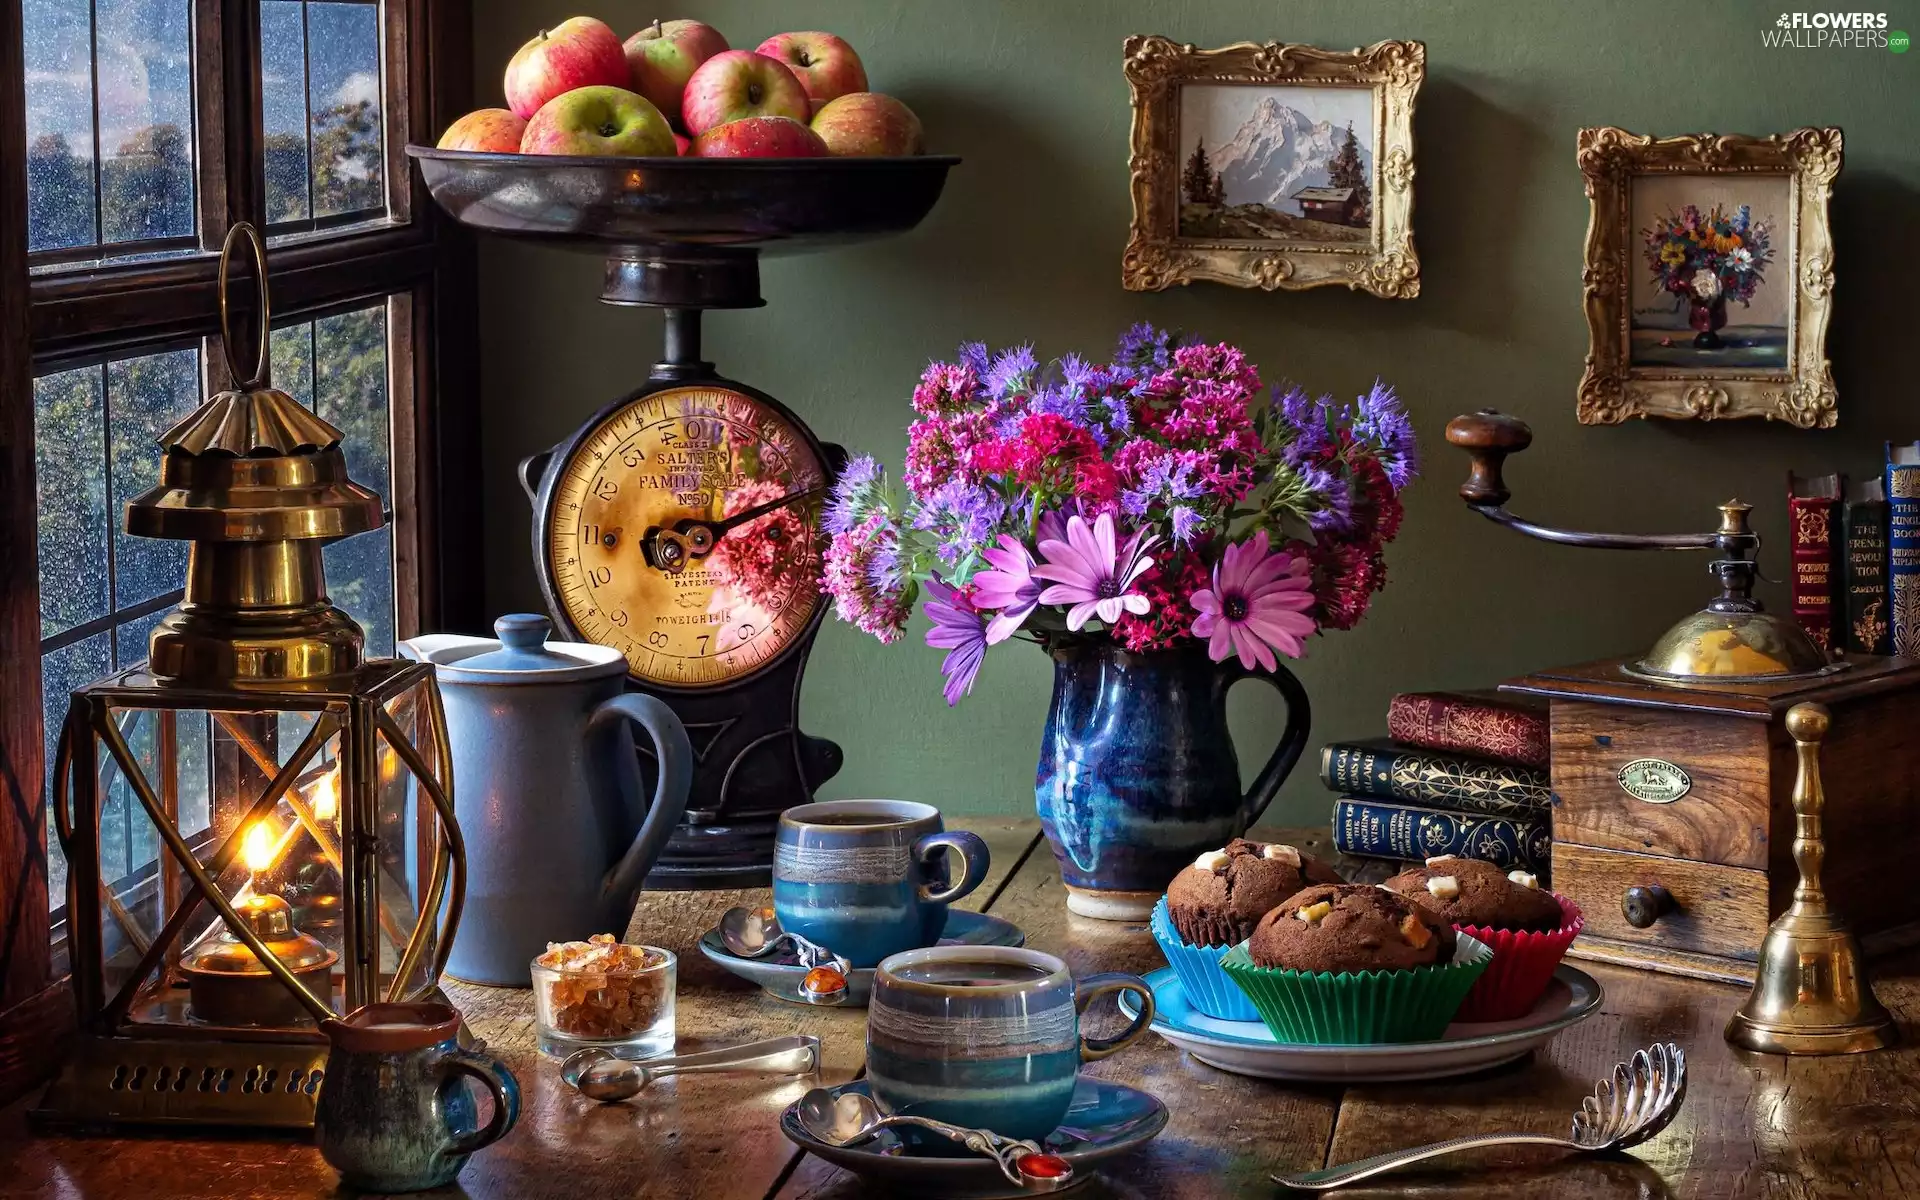 jug, cups, Paintings, weight, Lamp, Window, Muffins, composition, mill, apples, Flowers, bouquet